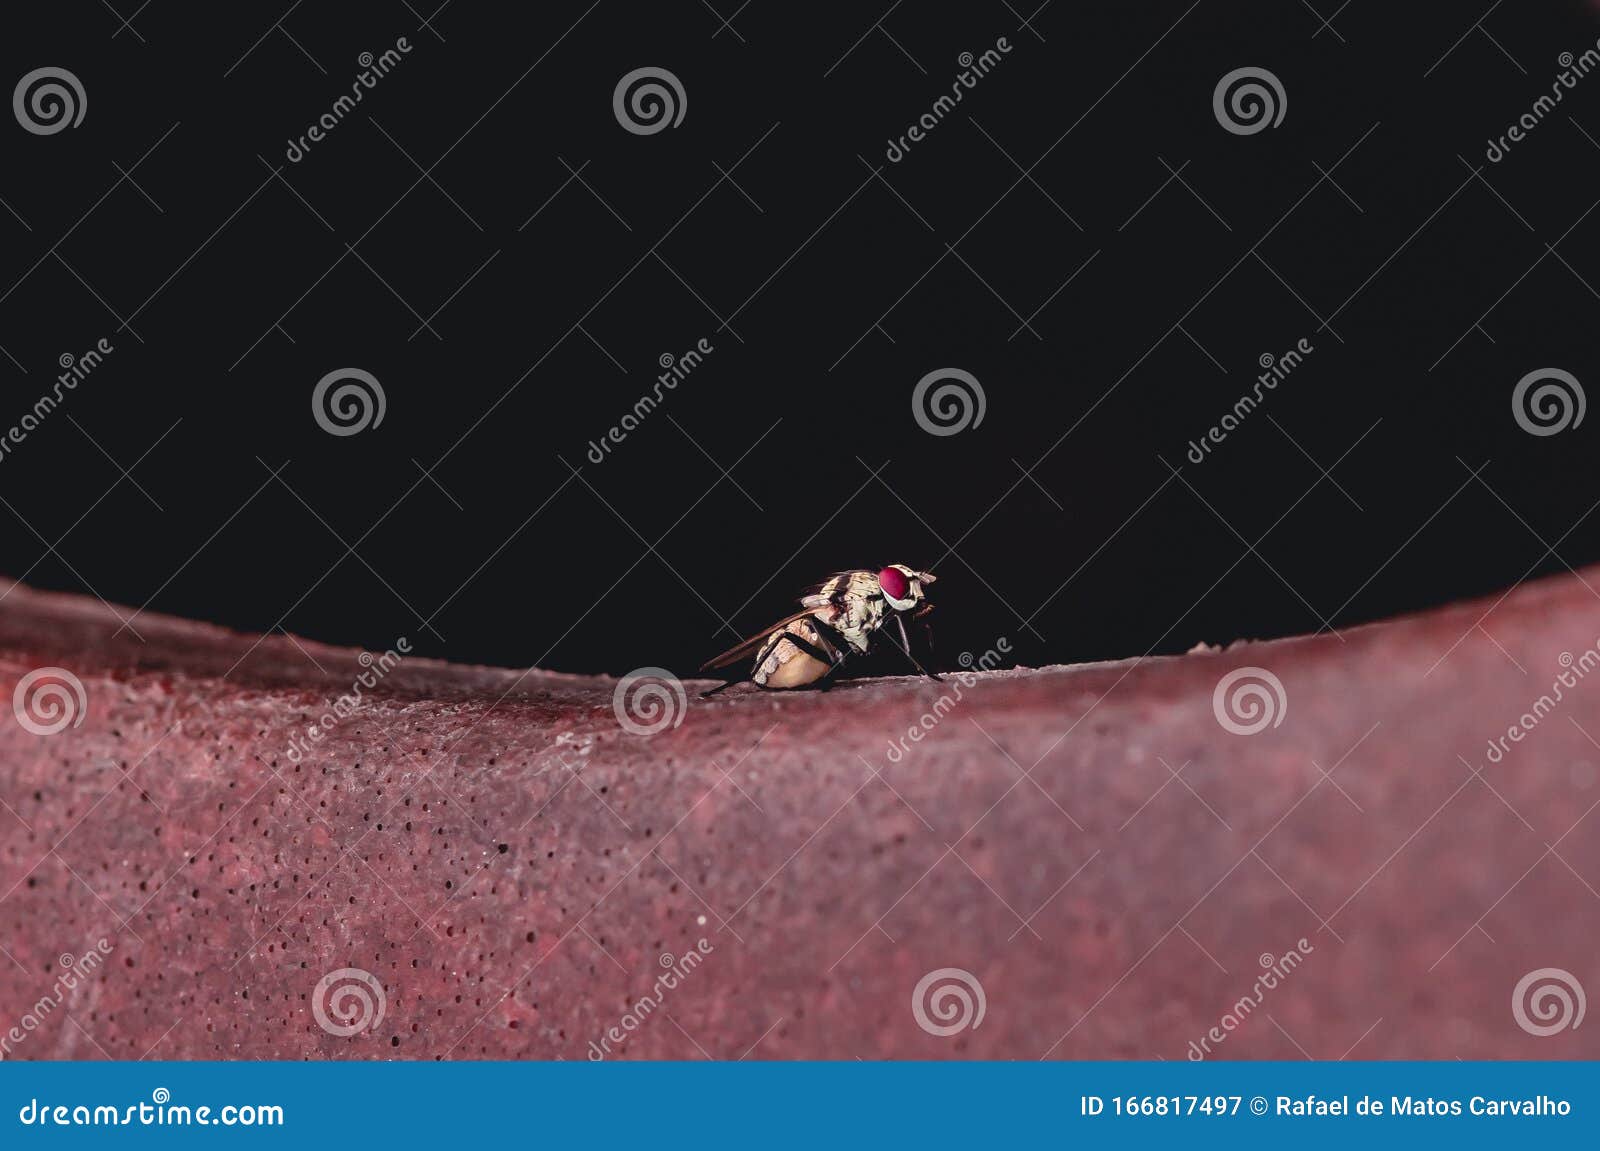 a fly over a vase with the black background.